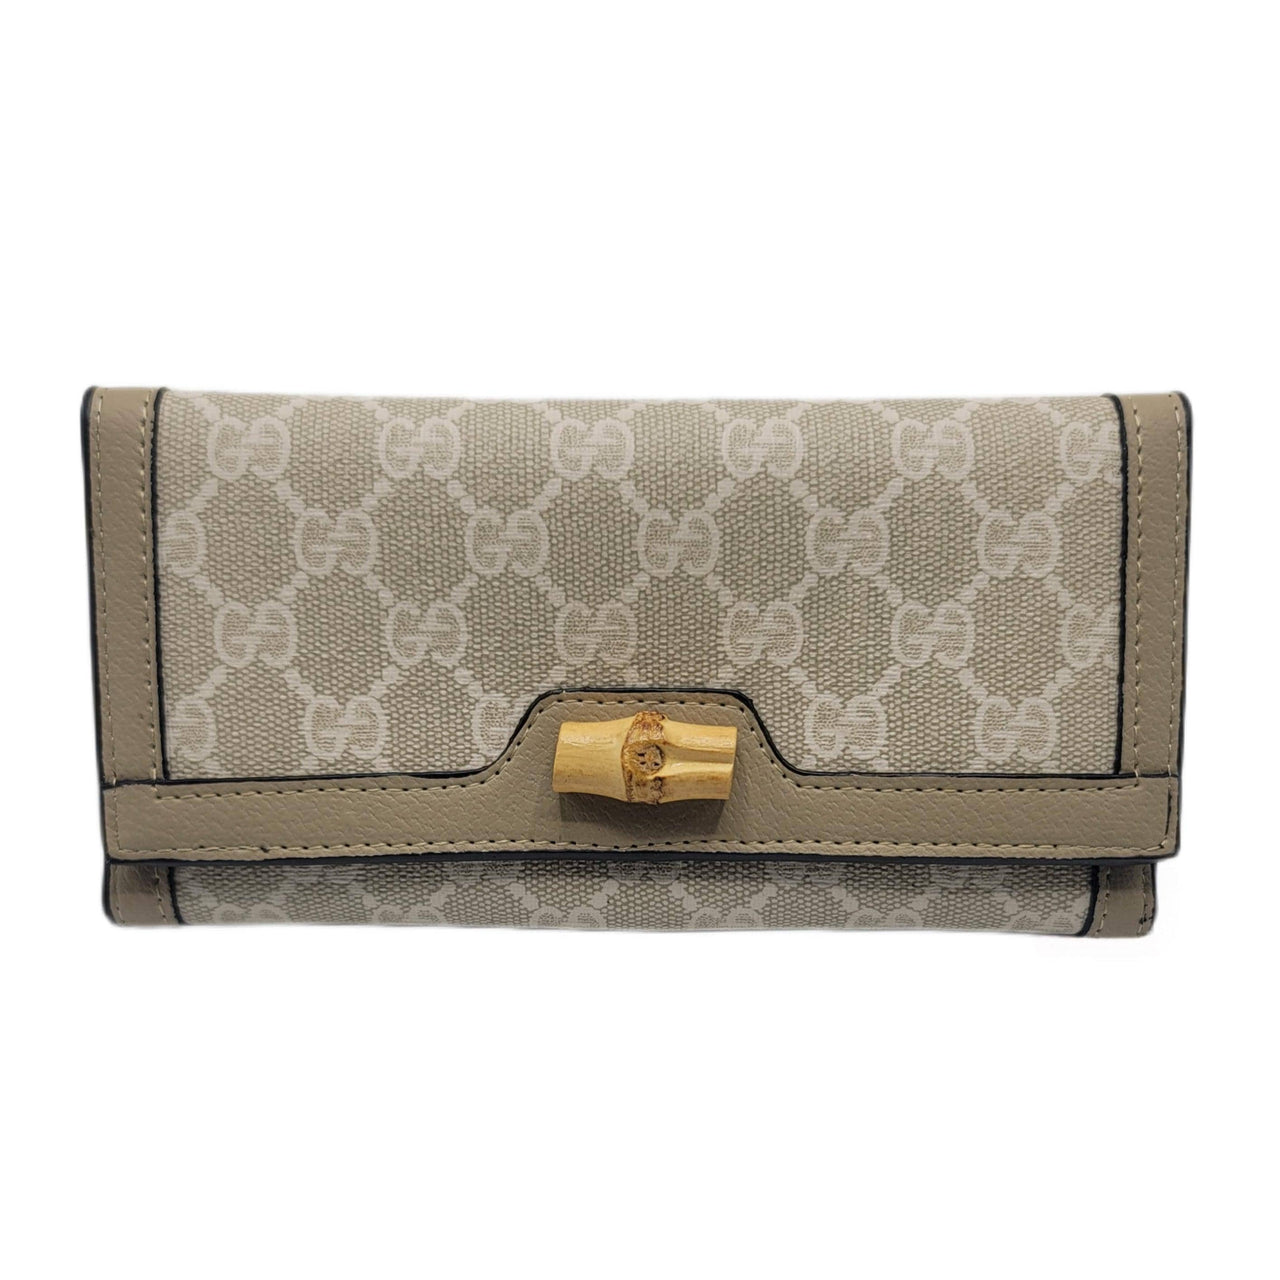 The Bag Couture Luggage & Bags Gucci 3 Fold Wallet Beige Bamboo